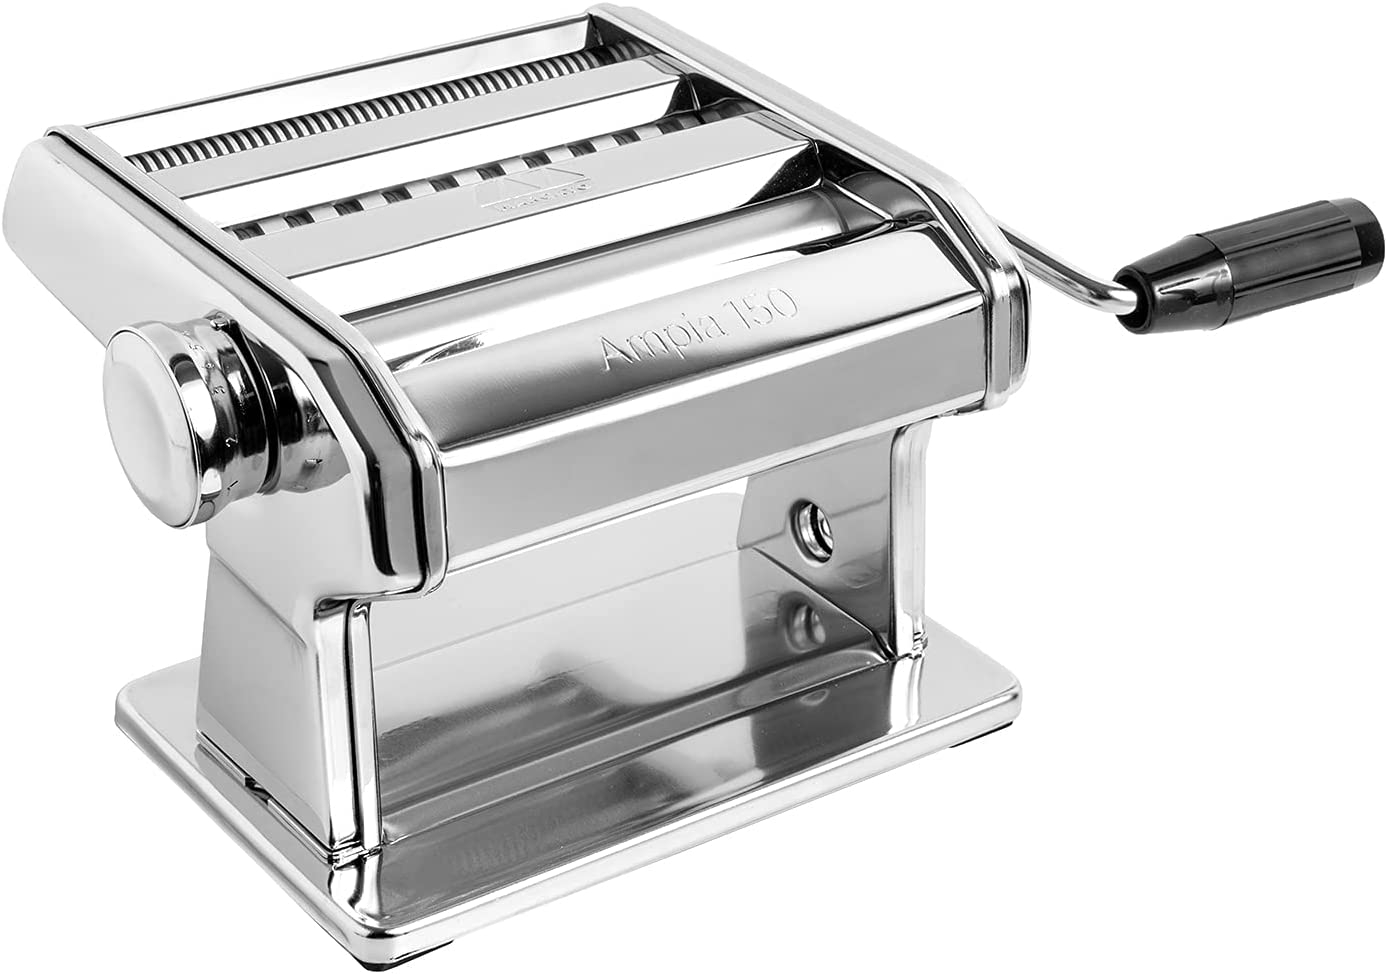 Marcato Atlas Drive Motor, Made in Italy, Powers Pasta Machines and Attachments, Silver Import To Shop ×Product customization